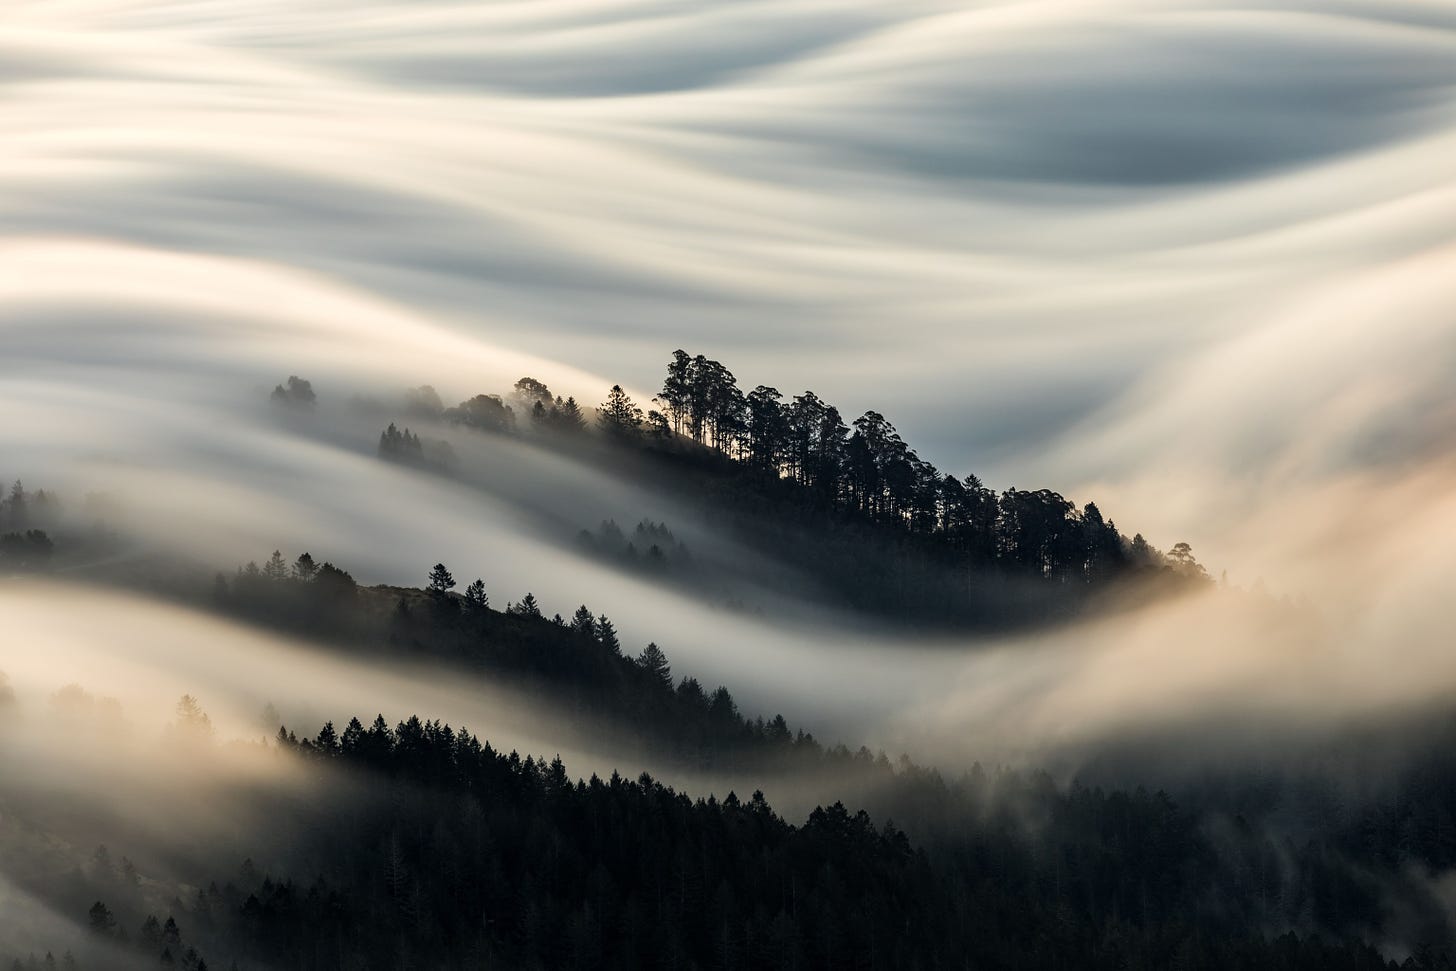 Winter Fog Image | National Geographic Your Shot Photo of the Day